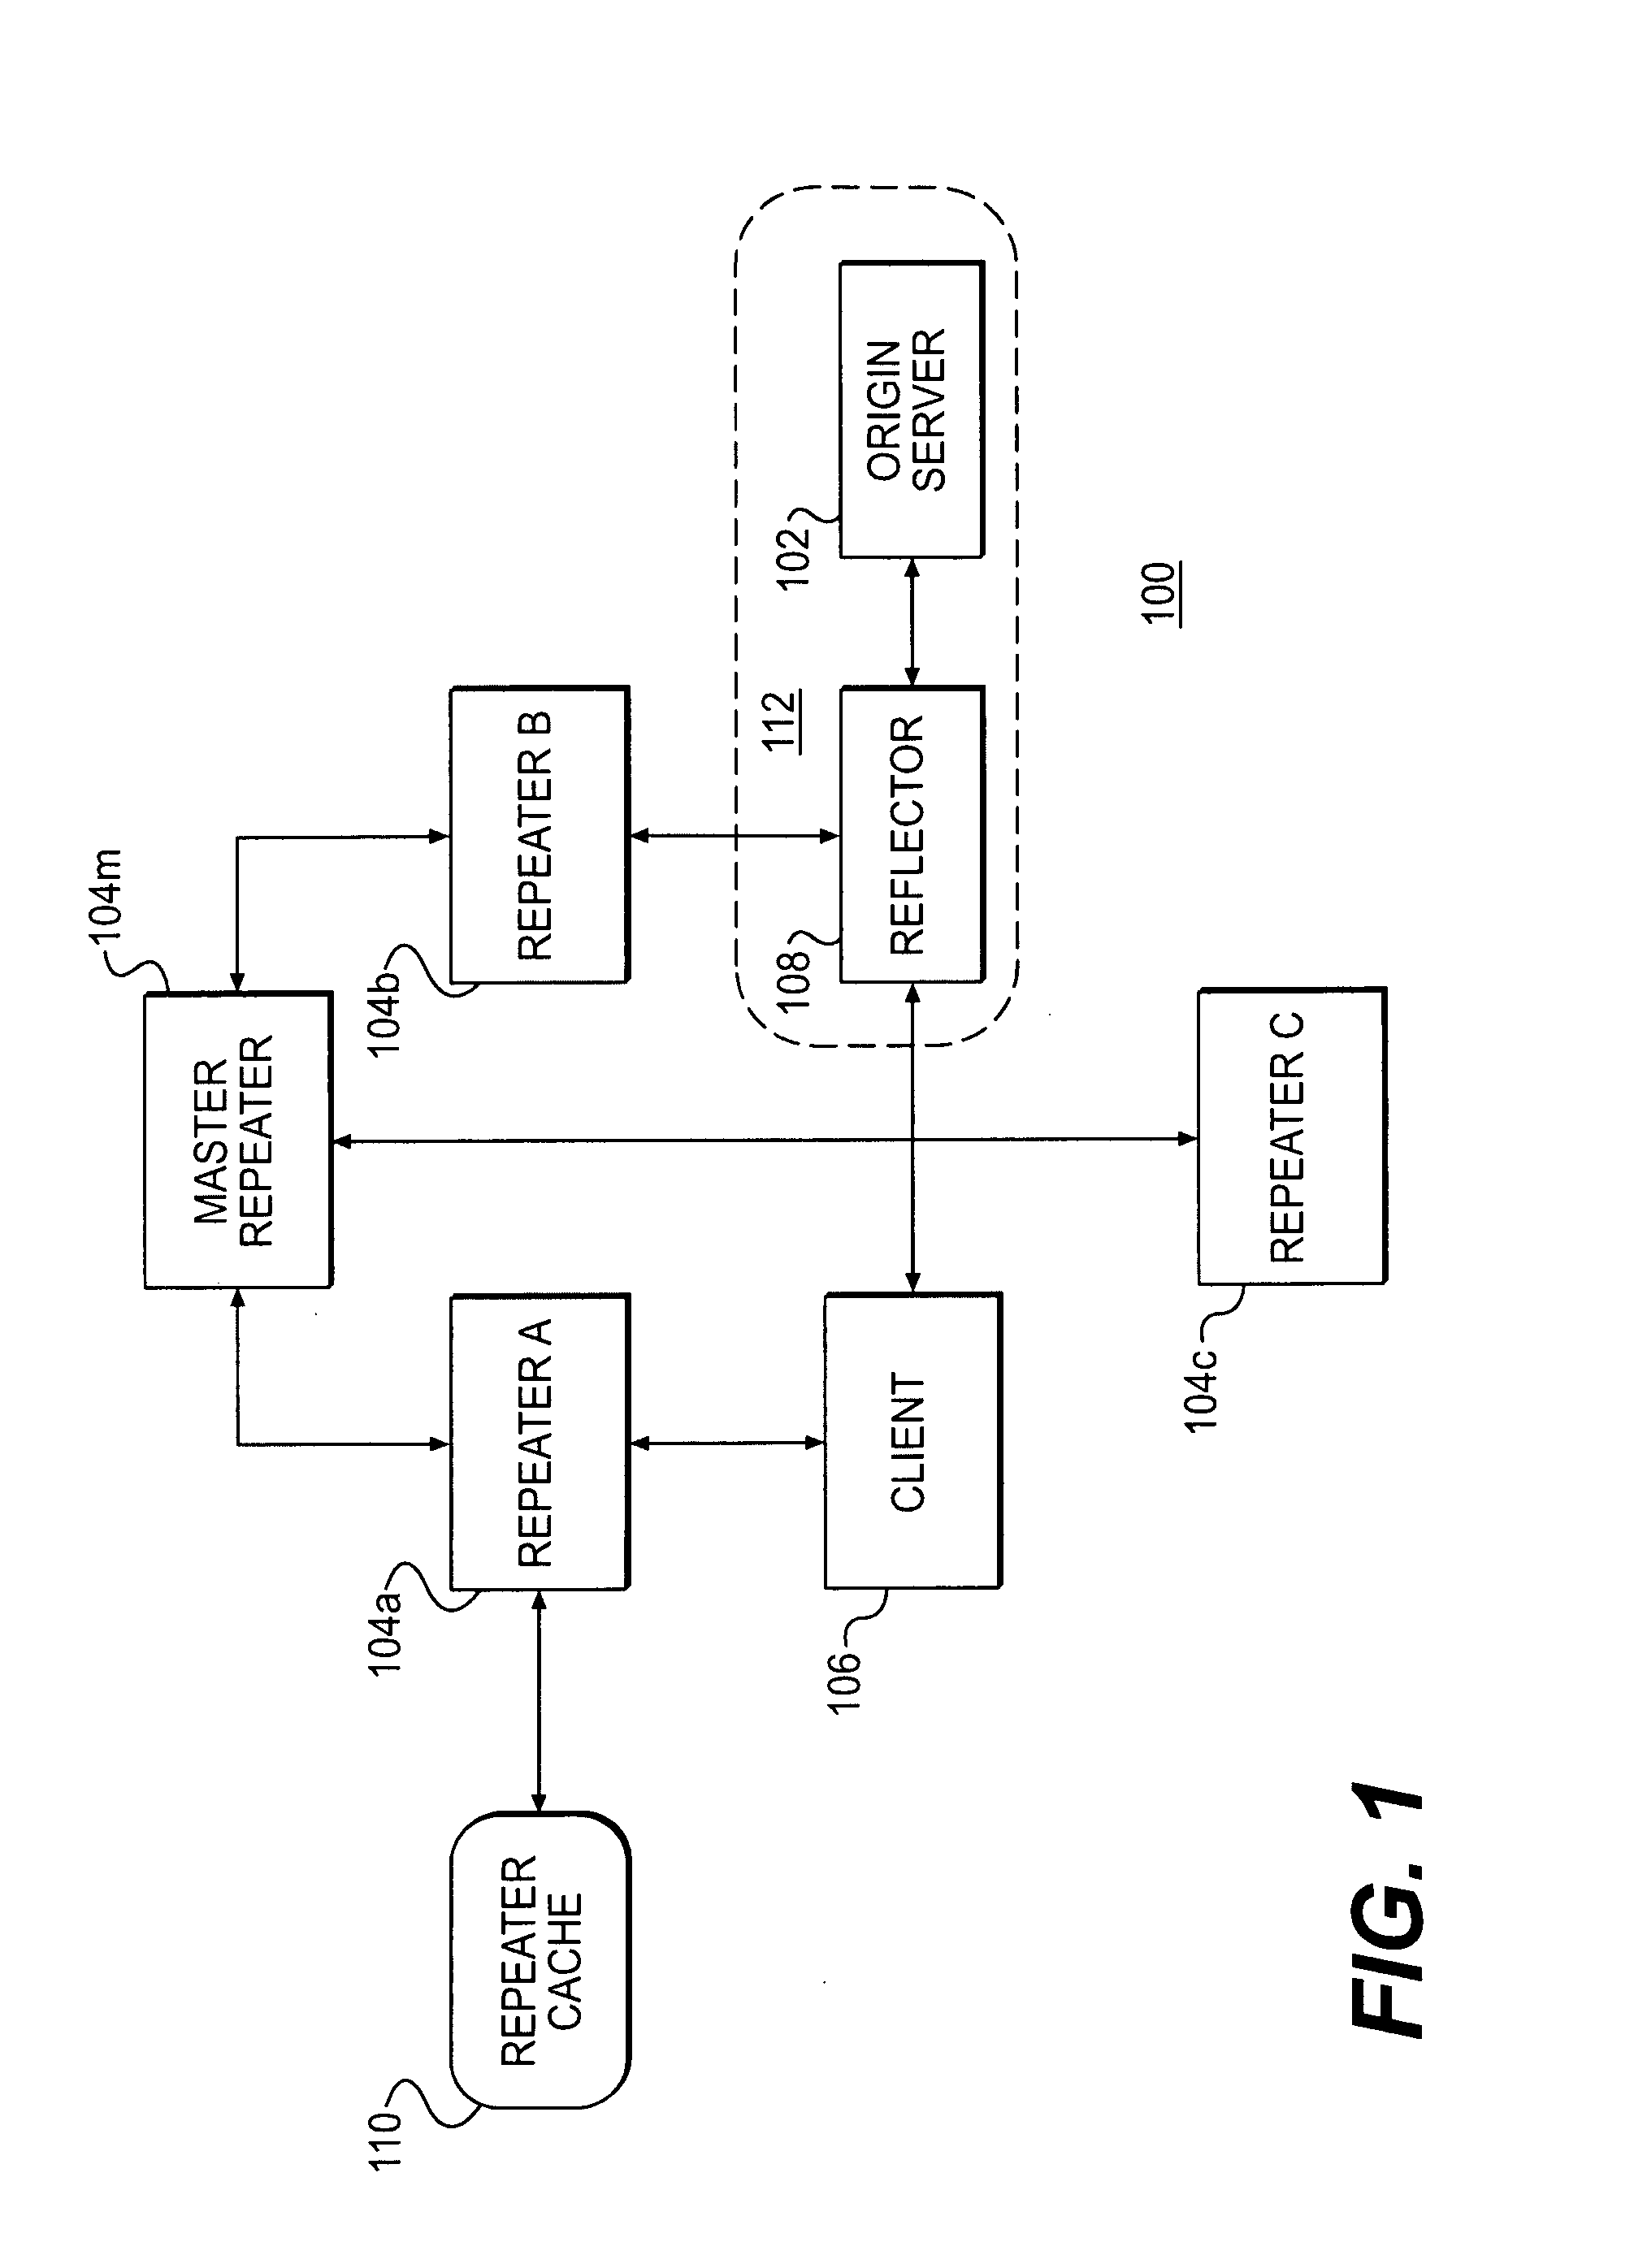 Resource invalidation in a content delivery network